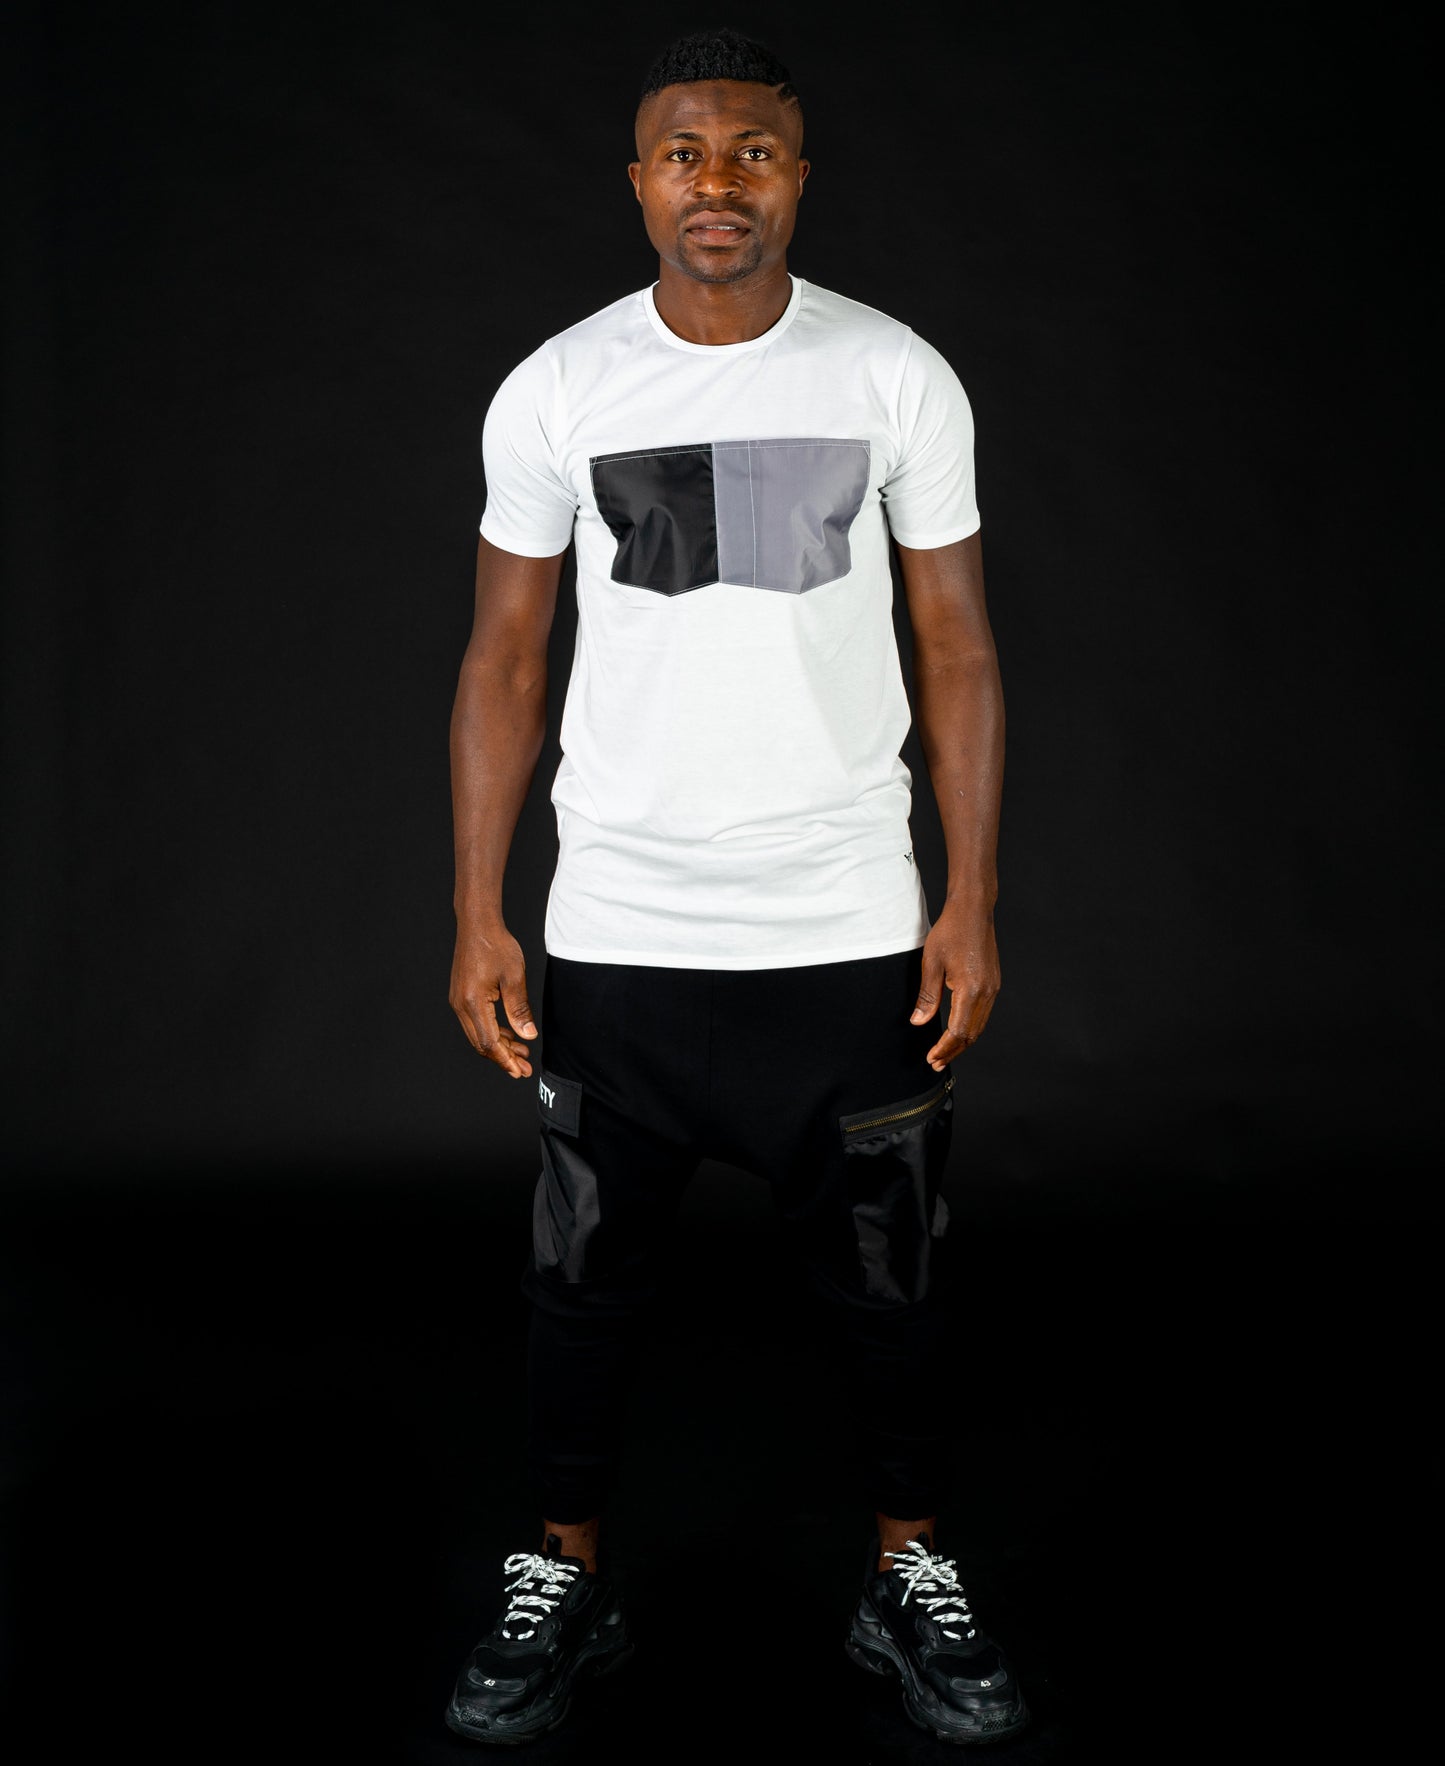 White t-shirt with black and grey design - Fatai Style